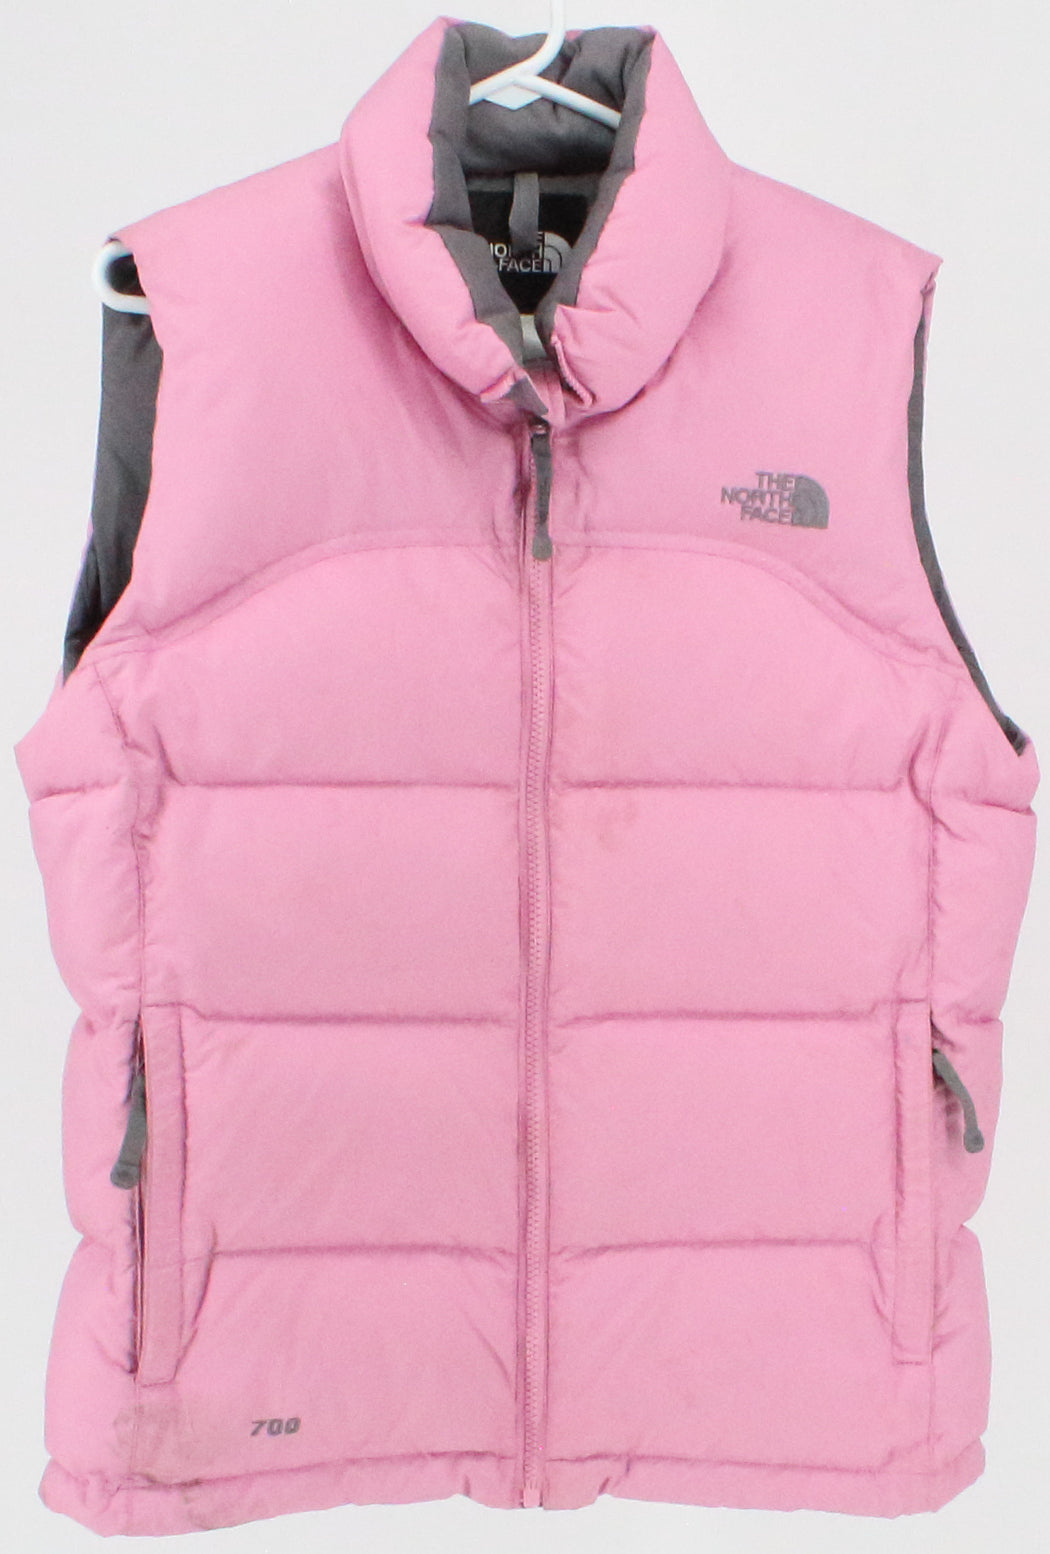 The North Face 700 Pink Down Vest